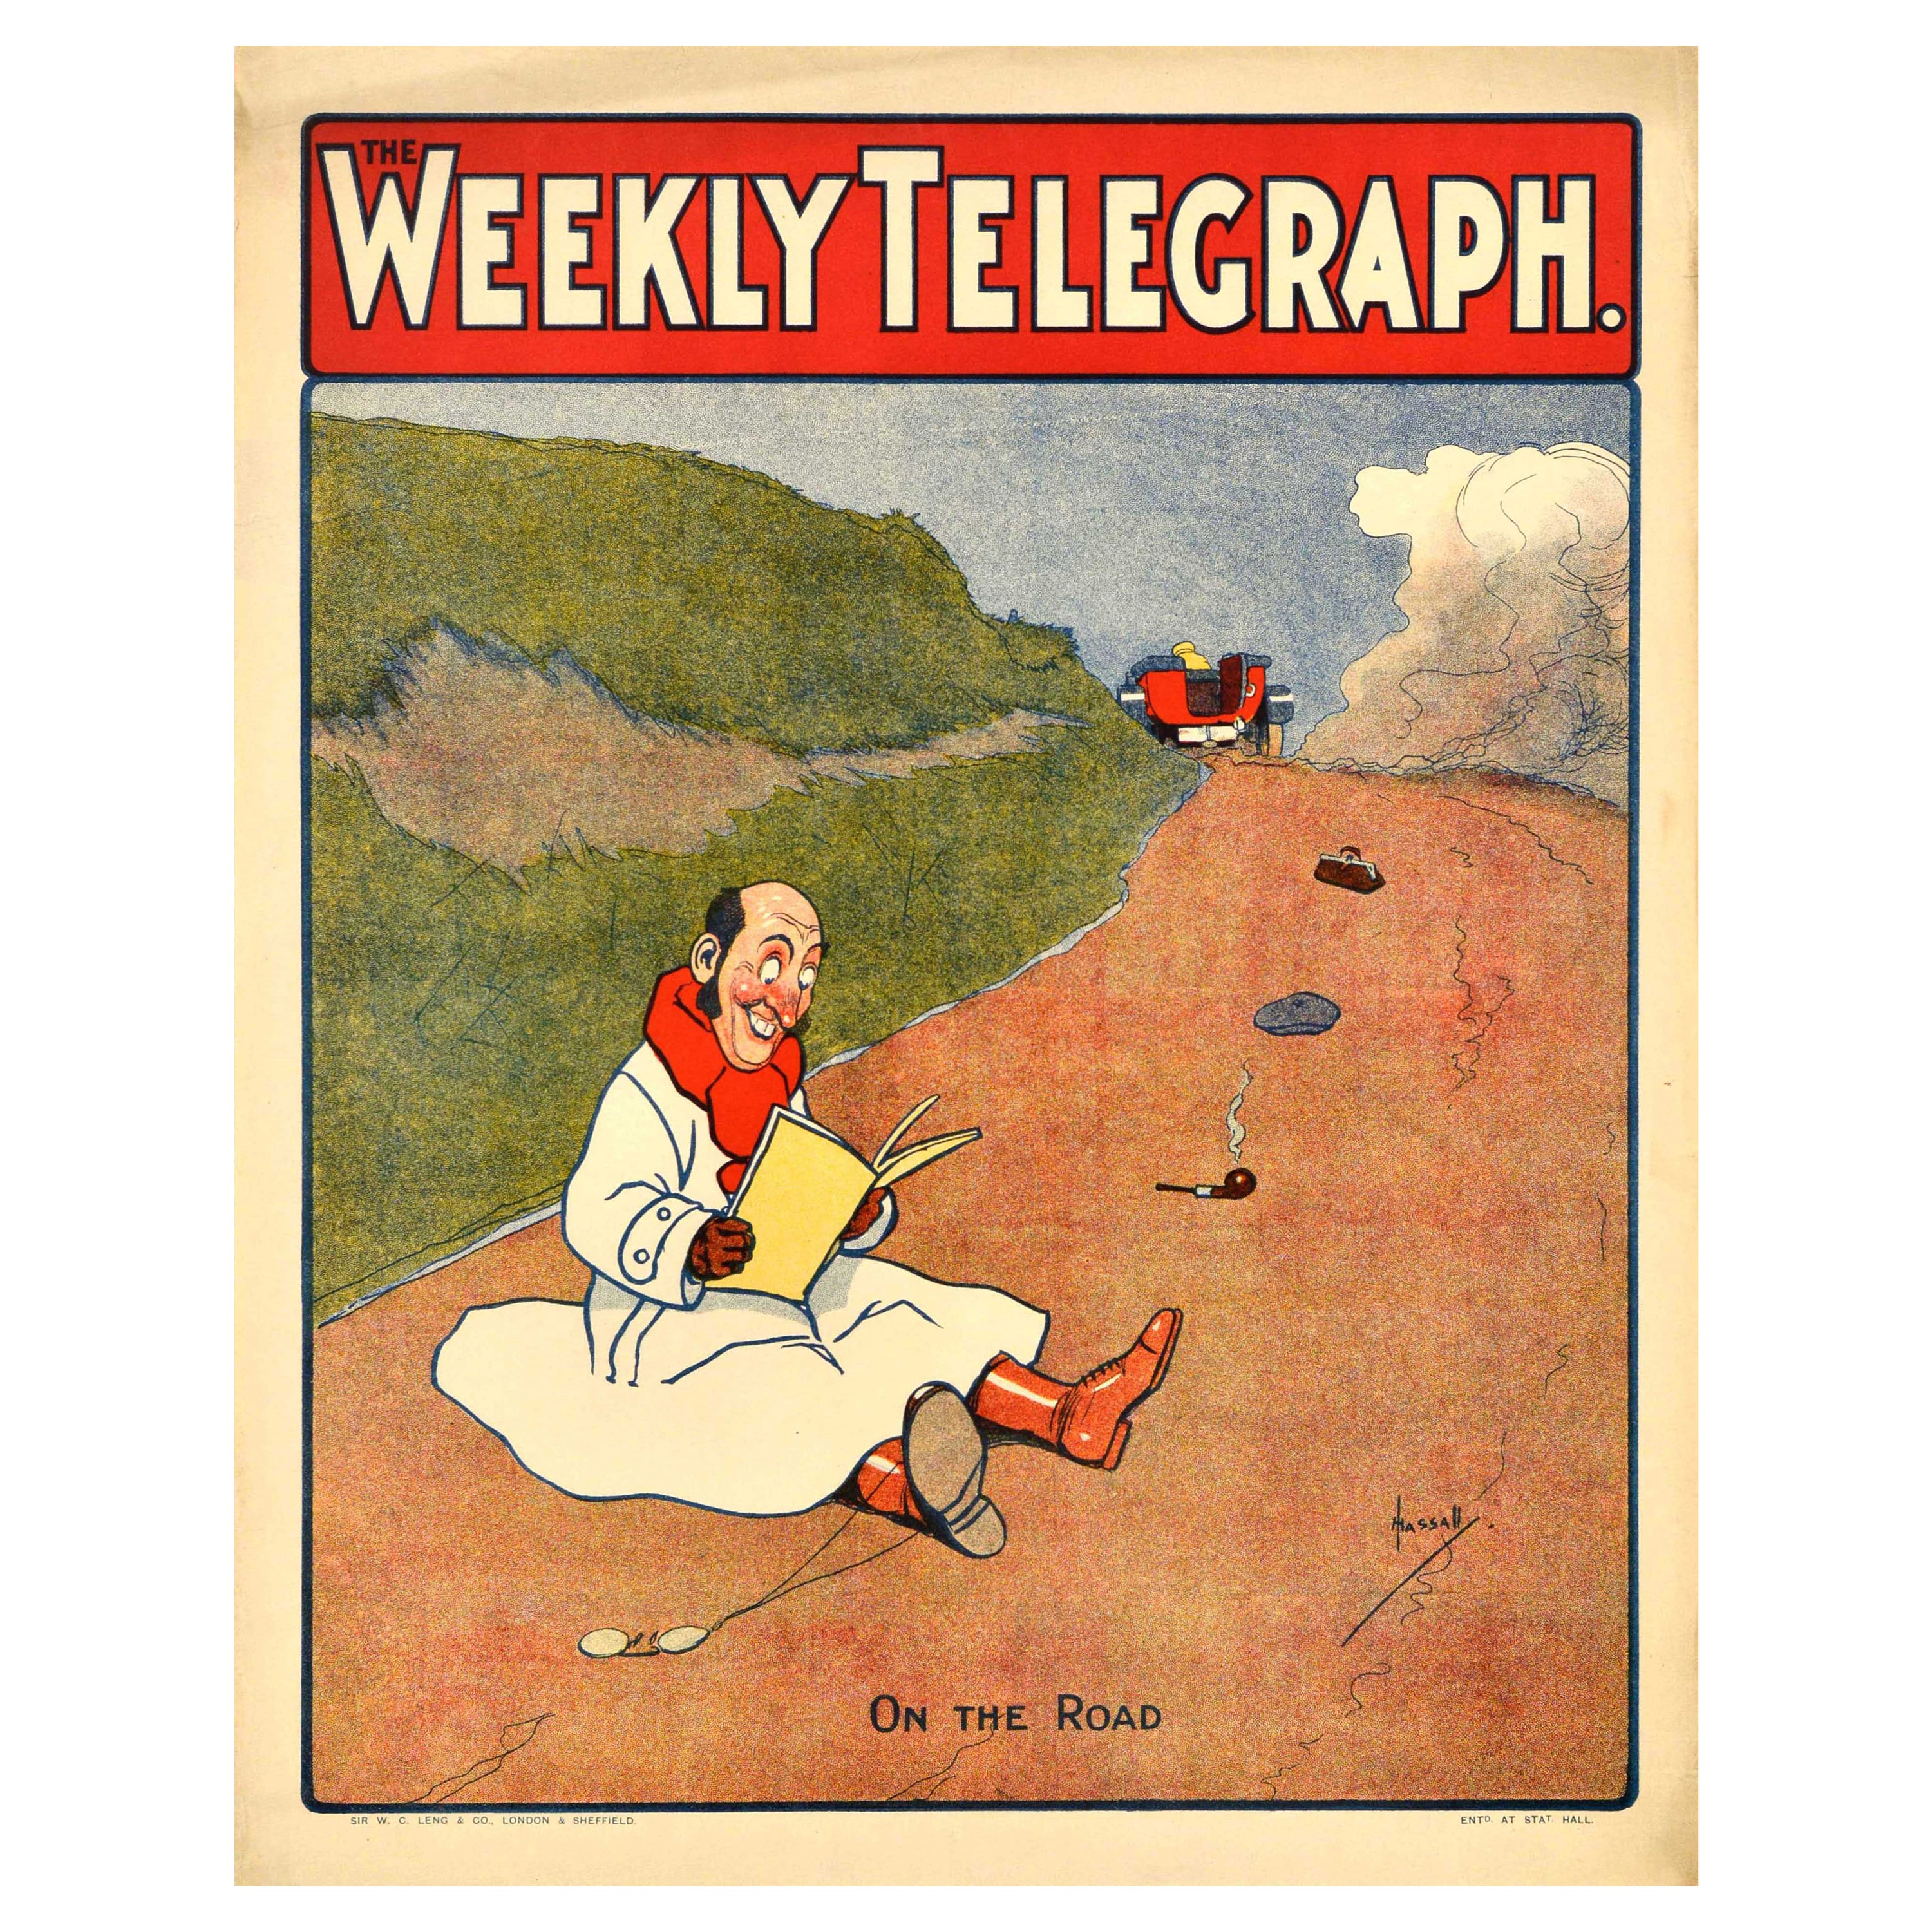 Original Antique Newspaper Advertising Poster The Weekly Telegraph On The Road